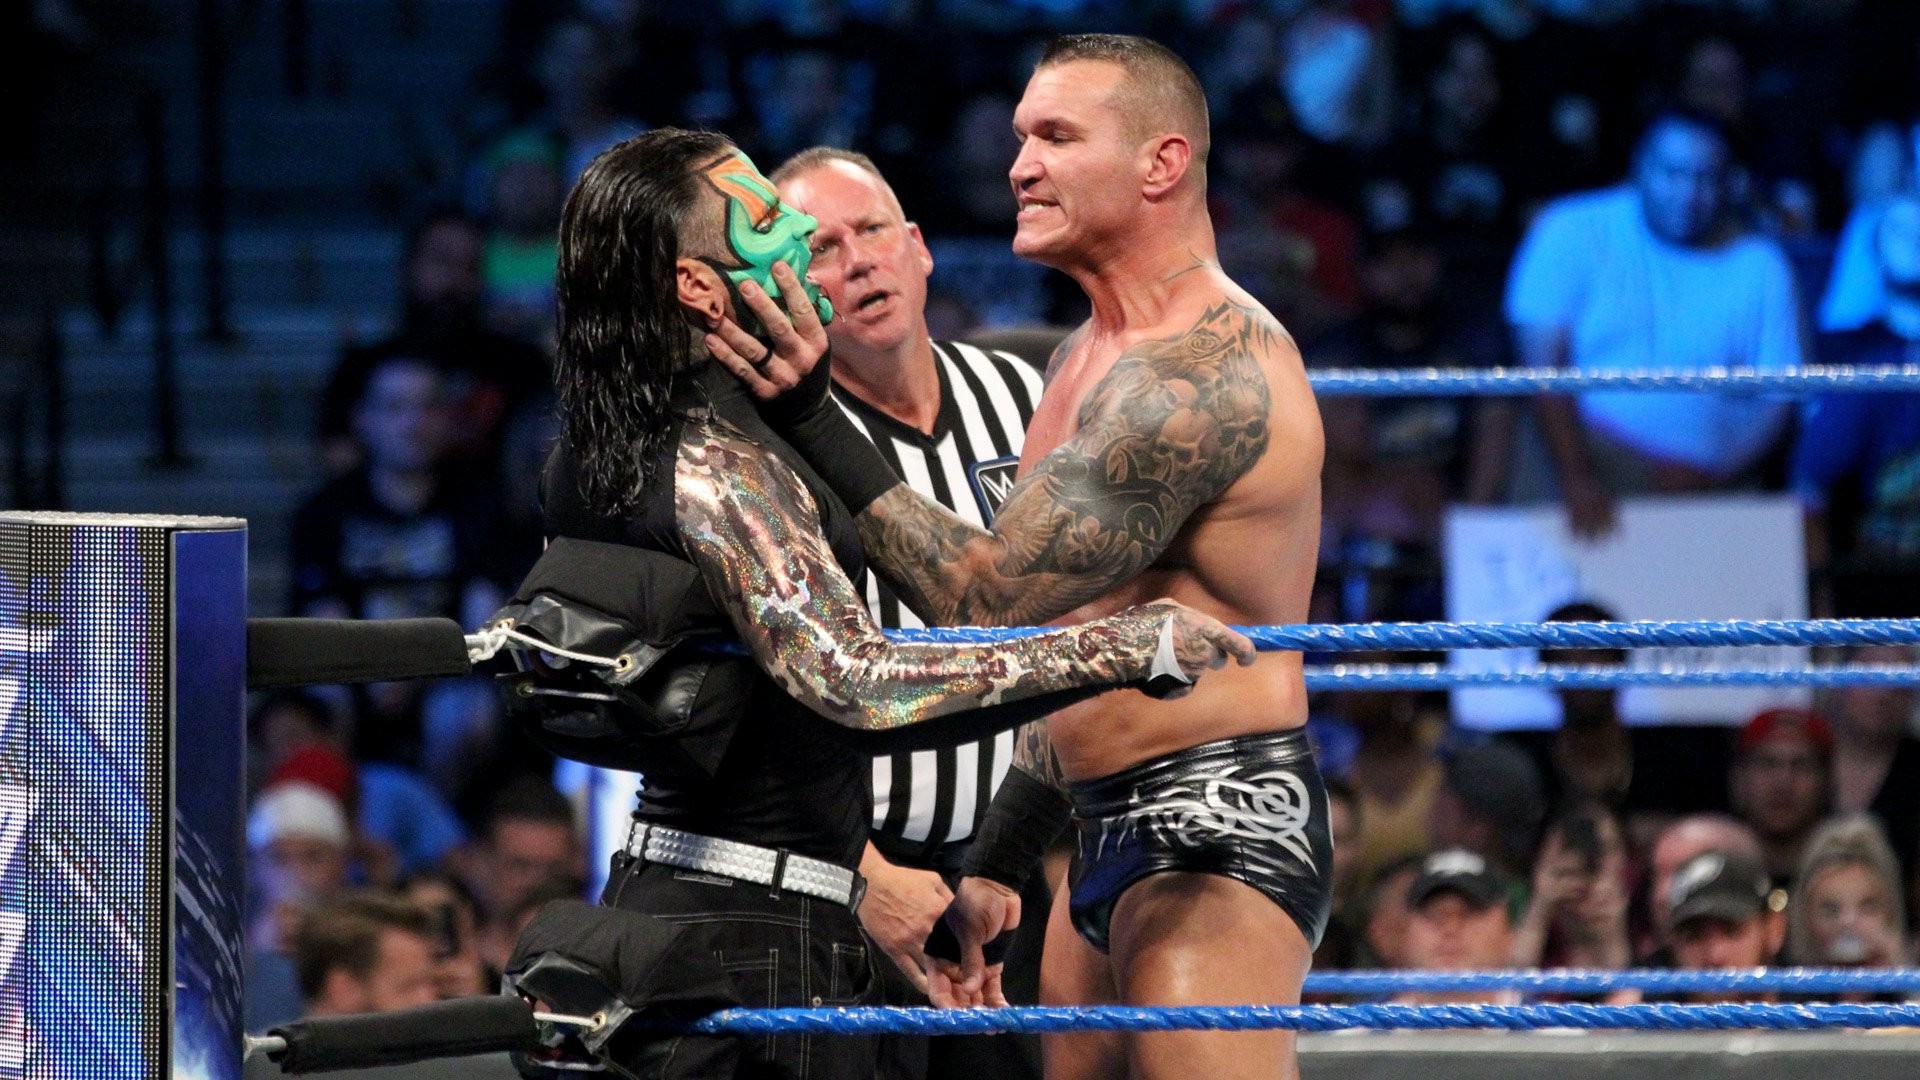 1920x1080 Jeff Hardy and Randy Orton fought to a chaotic no-contest